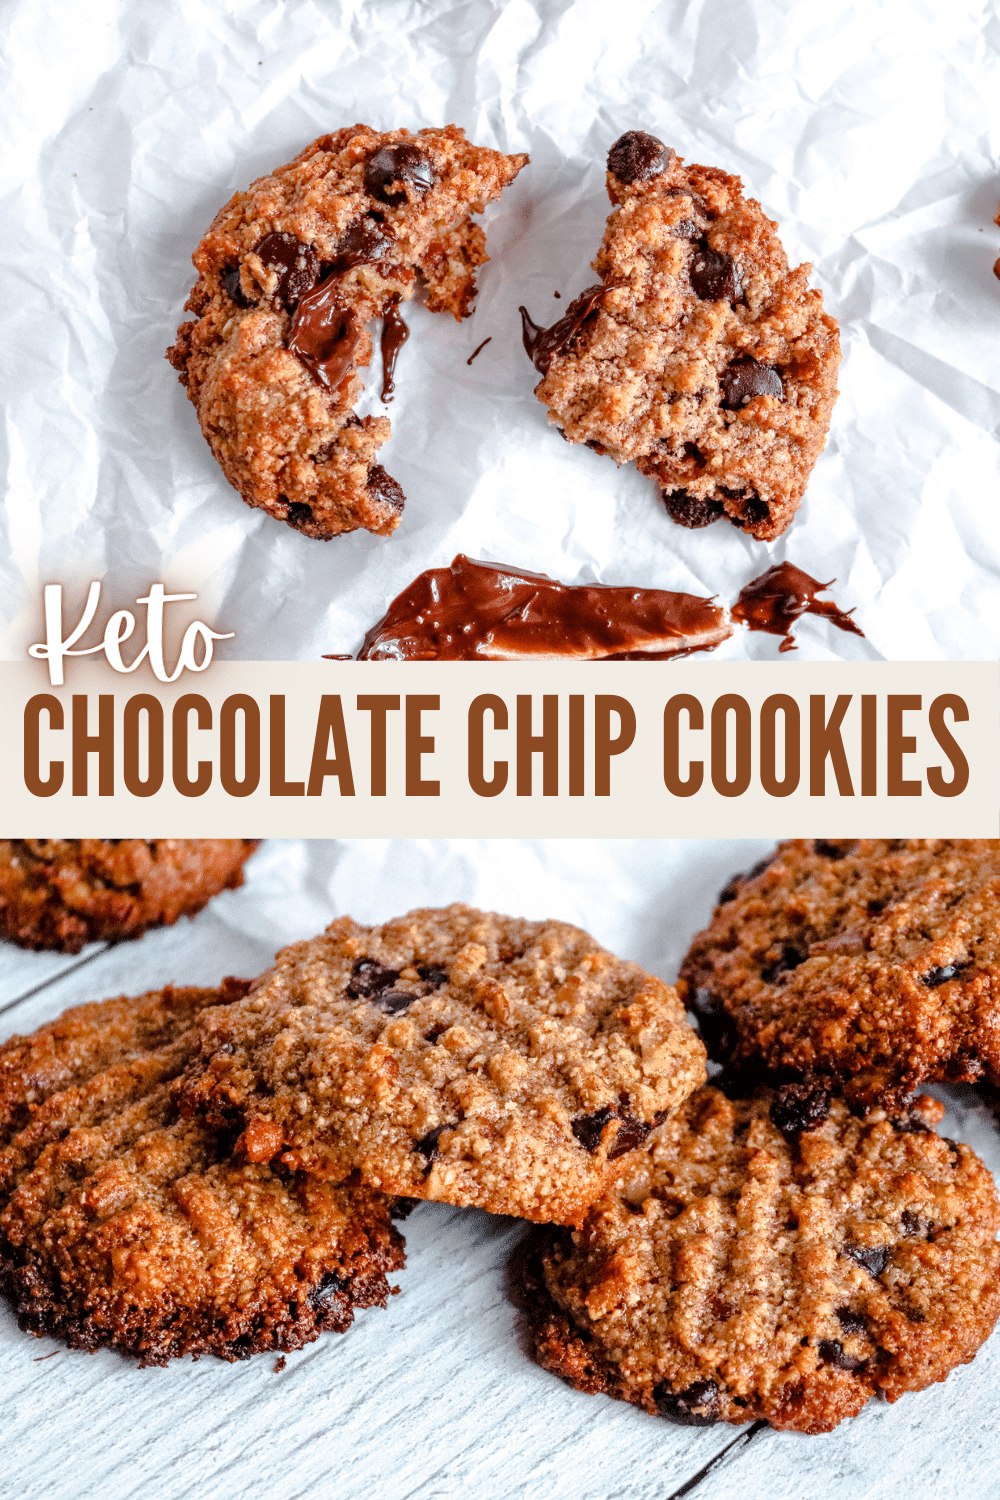 This Keto Chocolate Chip Cookies recipe is delicious and nutritious. These keto-friendly cookies are also gluten-free and sugar-free. #keto #chocolatechipcookies #recipe #glutenfree #sugarfree via @wondermomwannab